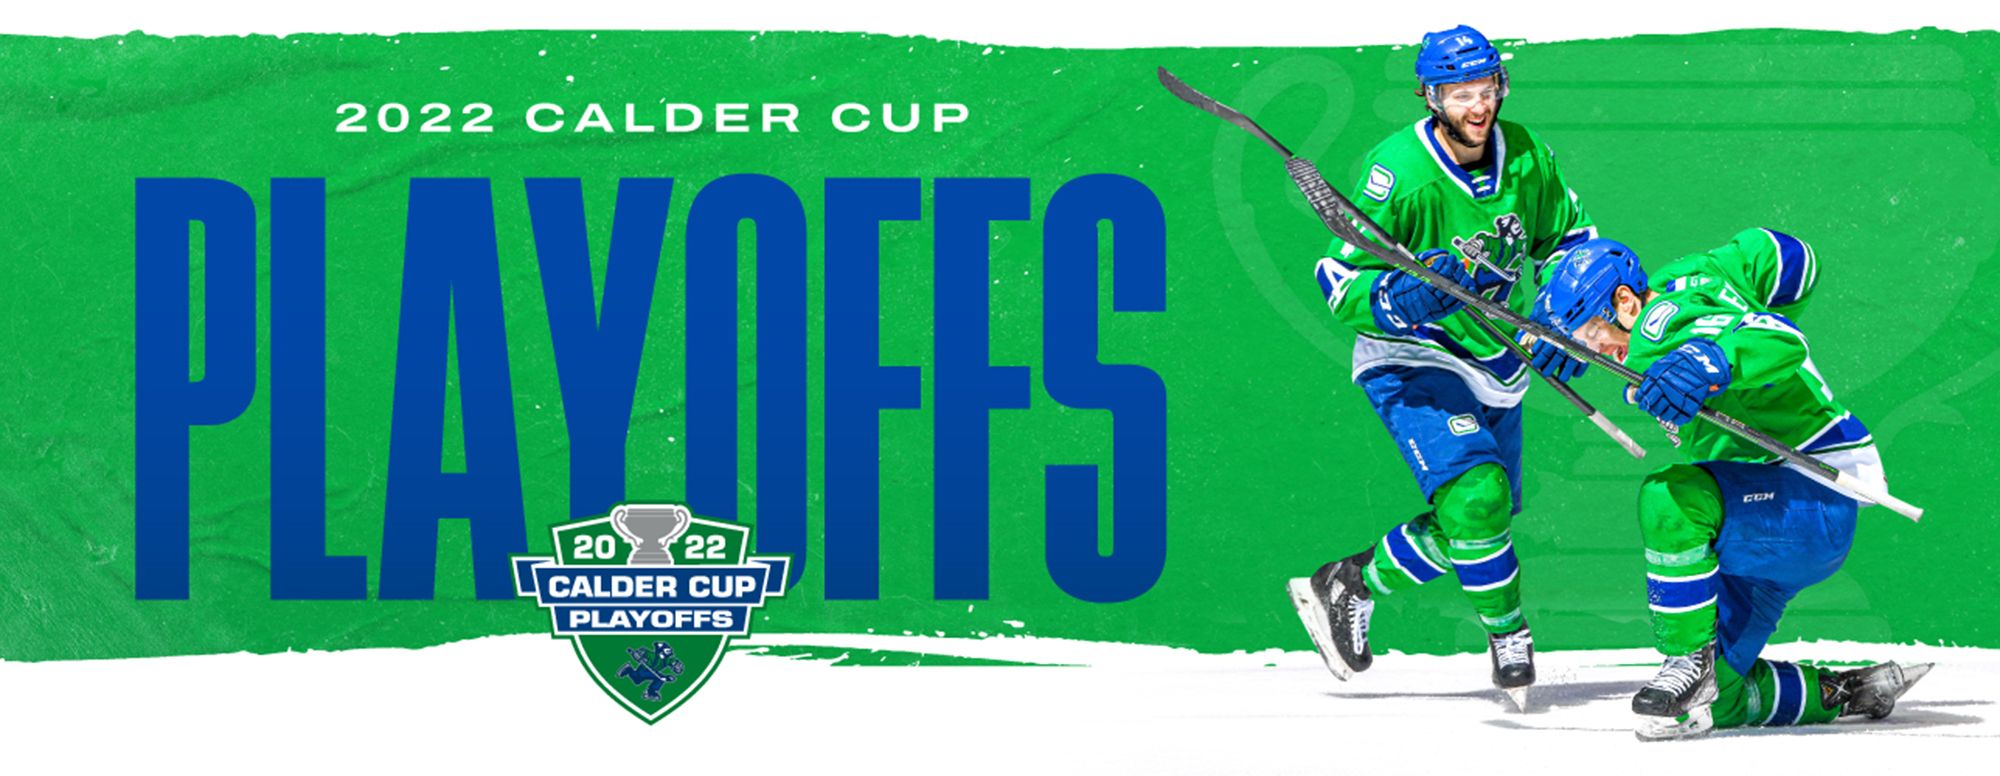 ABBOTSFORD CANUCKS SET FOR FIRSTROUND AHL CALDER CUP PLAYOFF MATCHUP